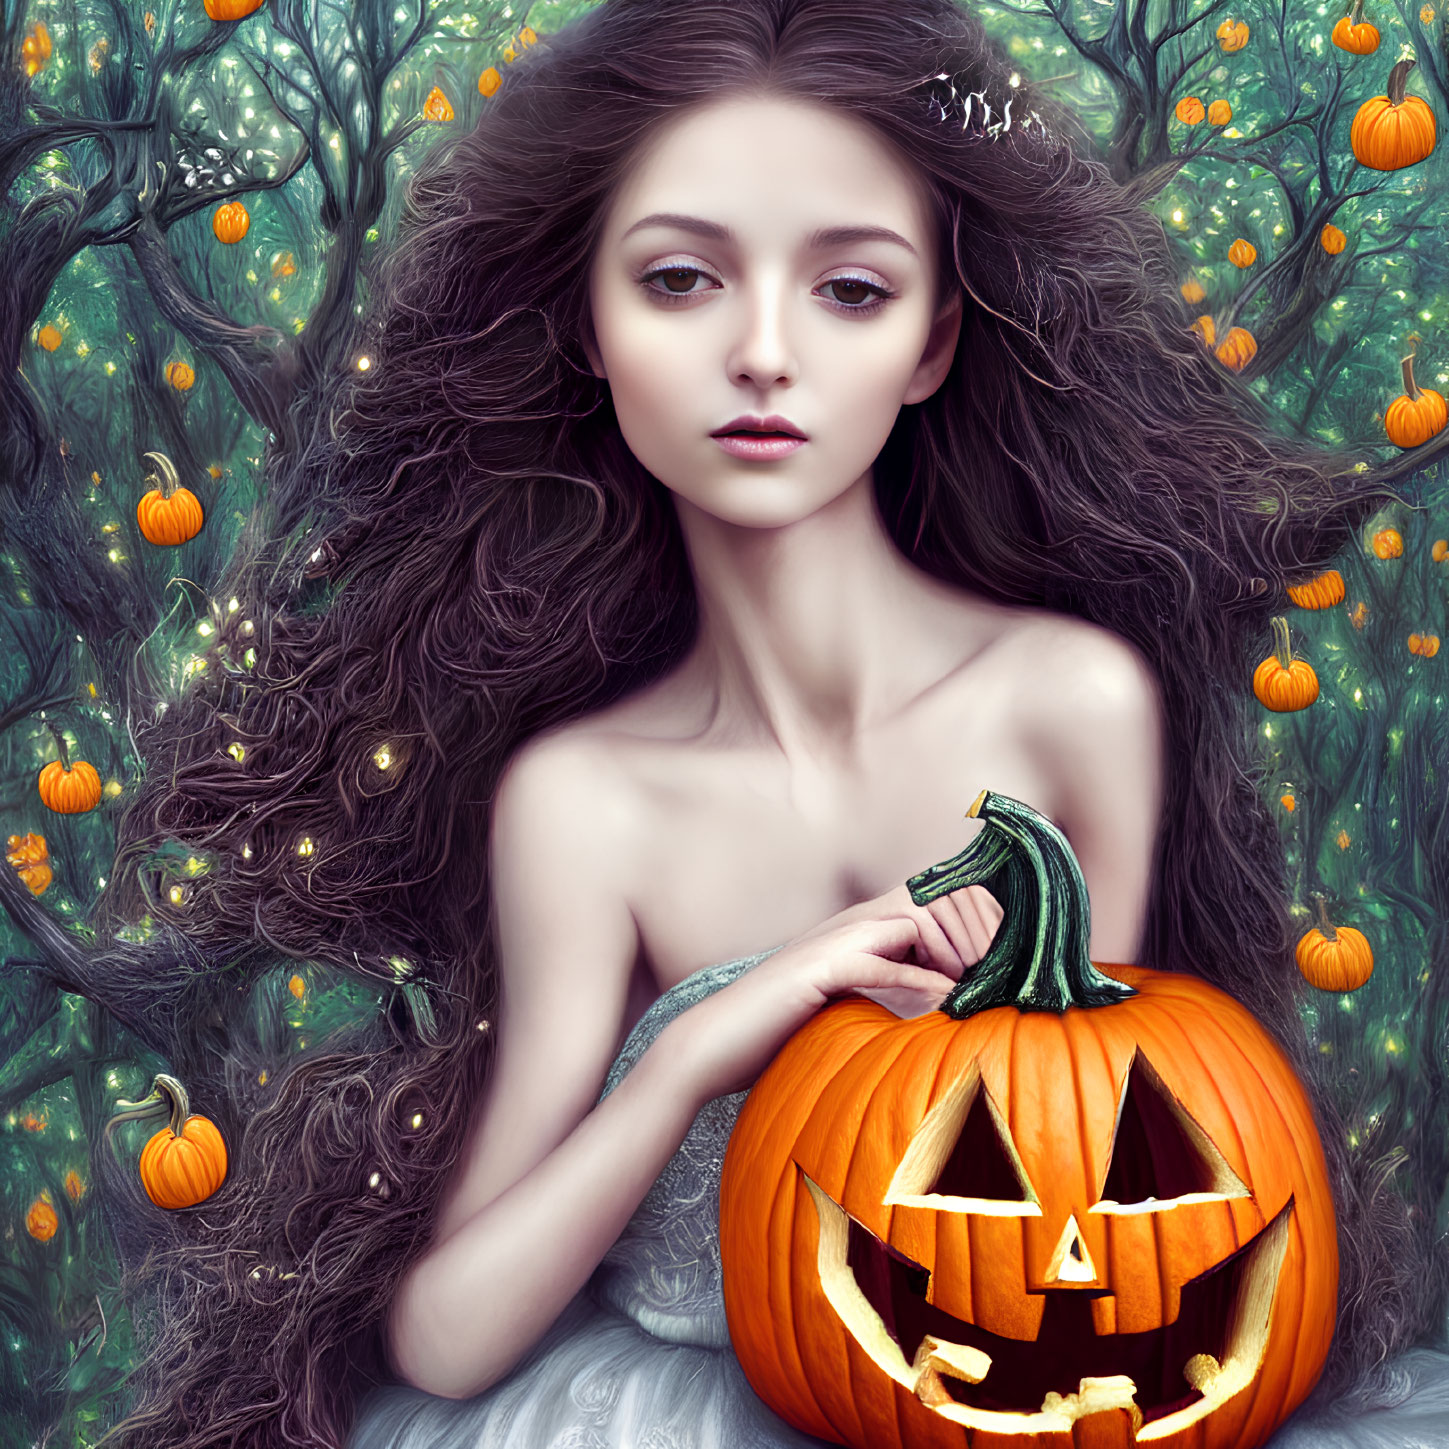 Dark-haired woman with tiara holding pumpkin in magical forest